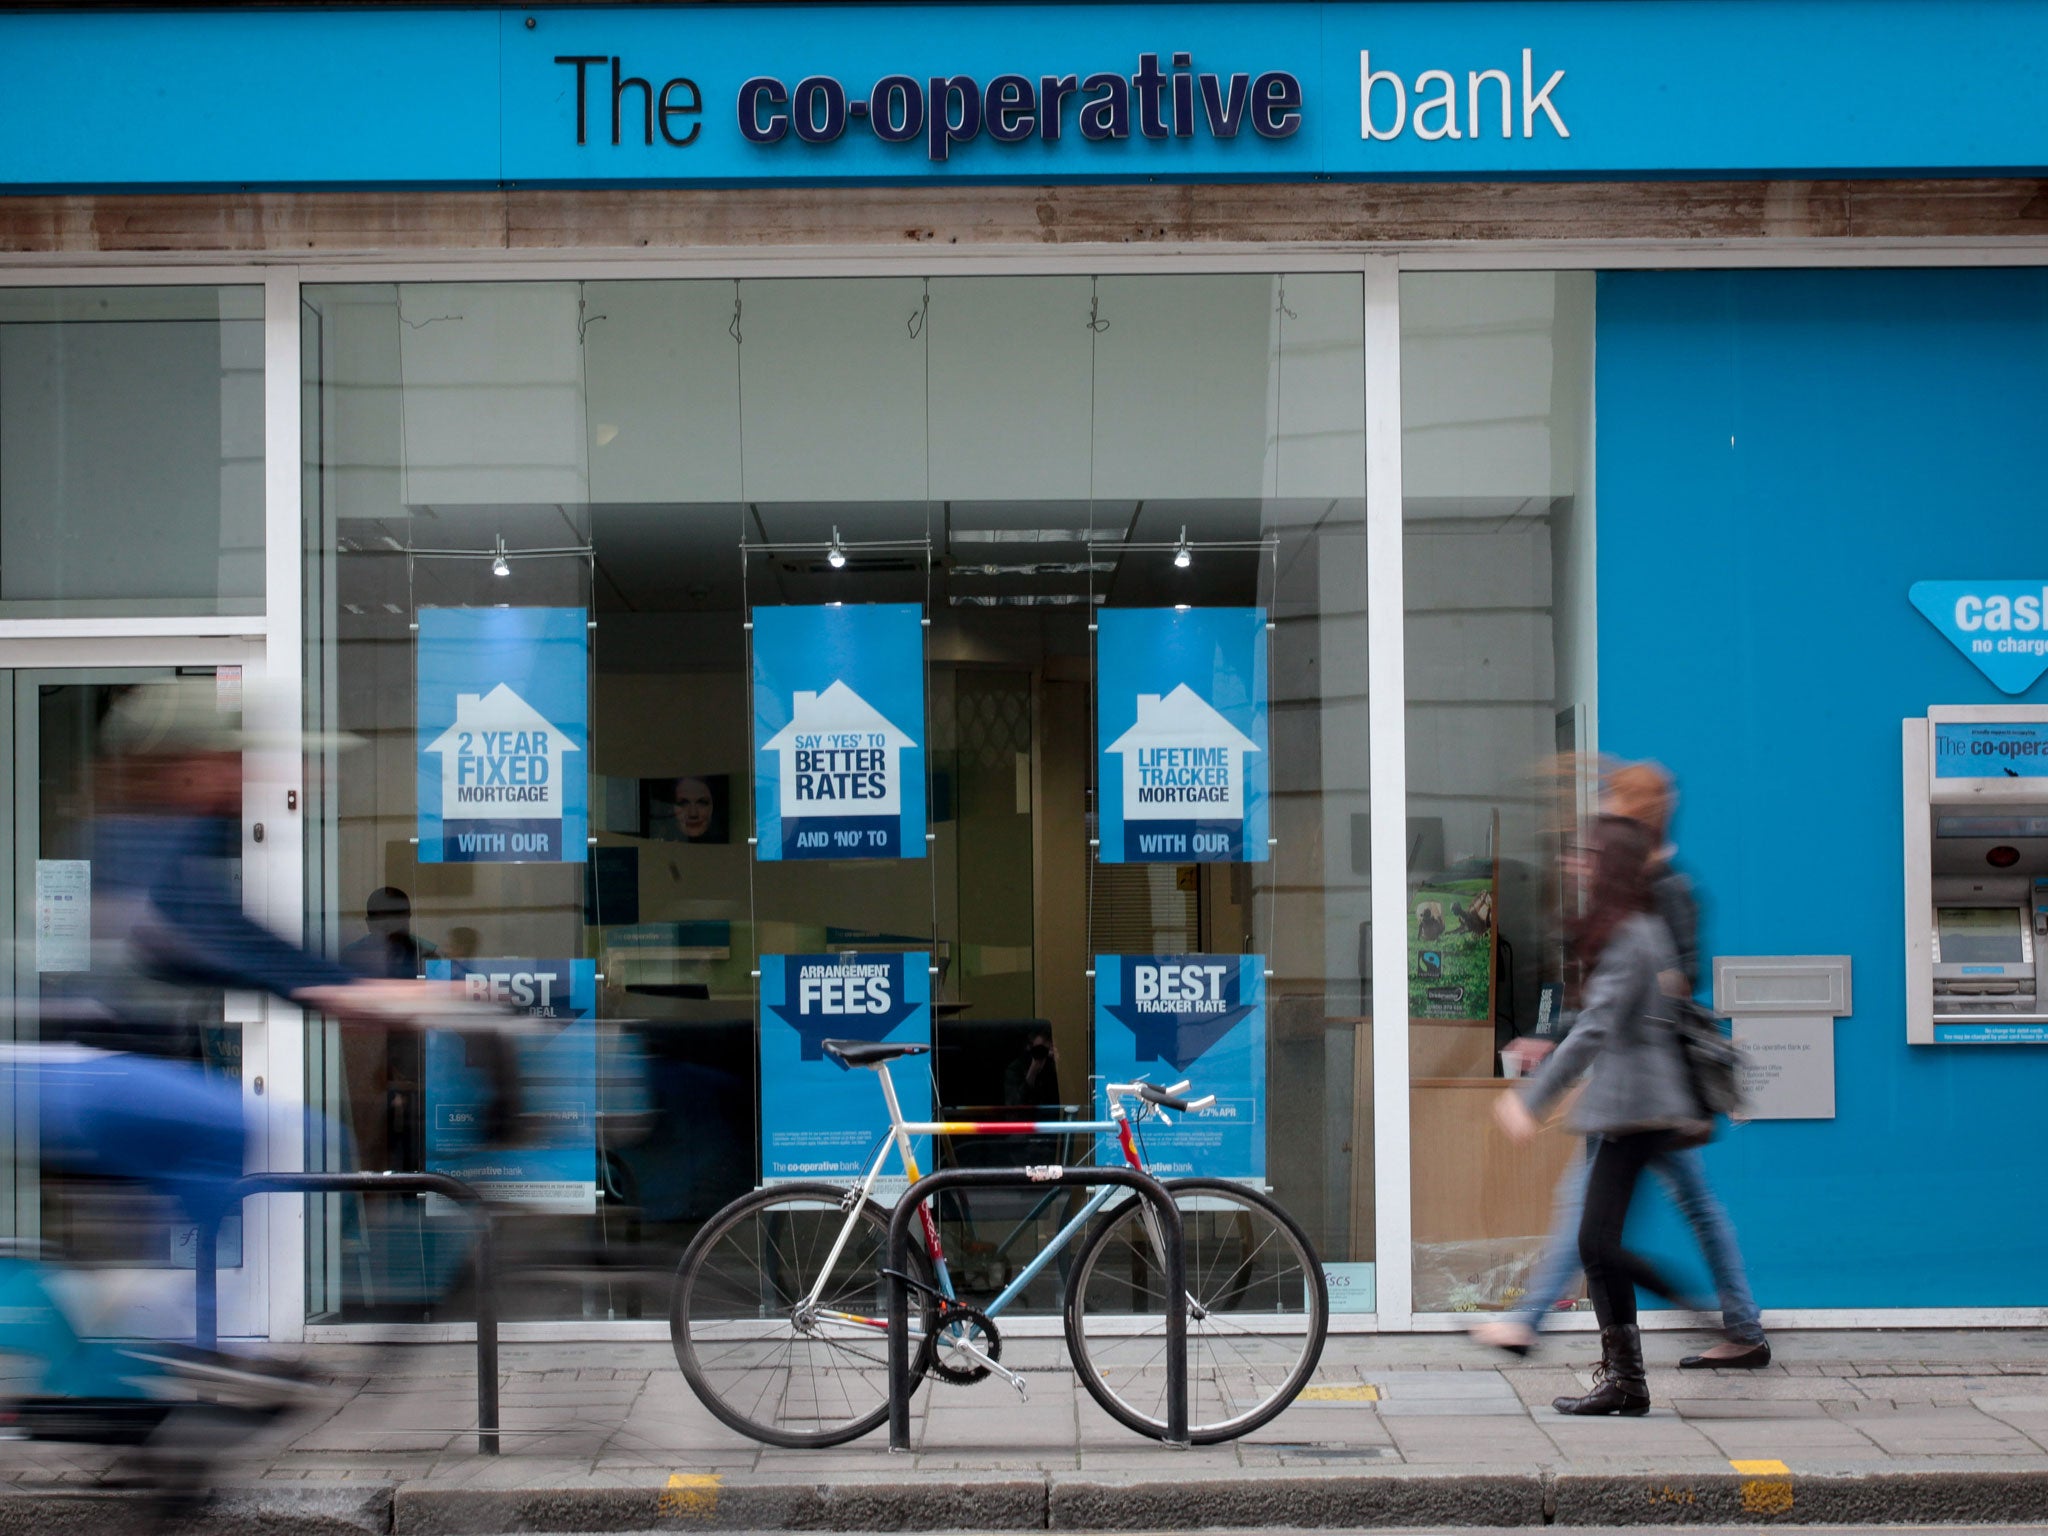 The Co-op has been under intense scrutiny after pulling out of a deal to buy more than 600 branches from Lloyds Banking Group